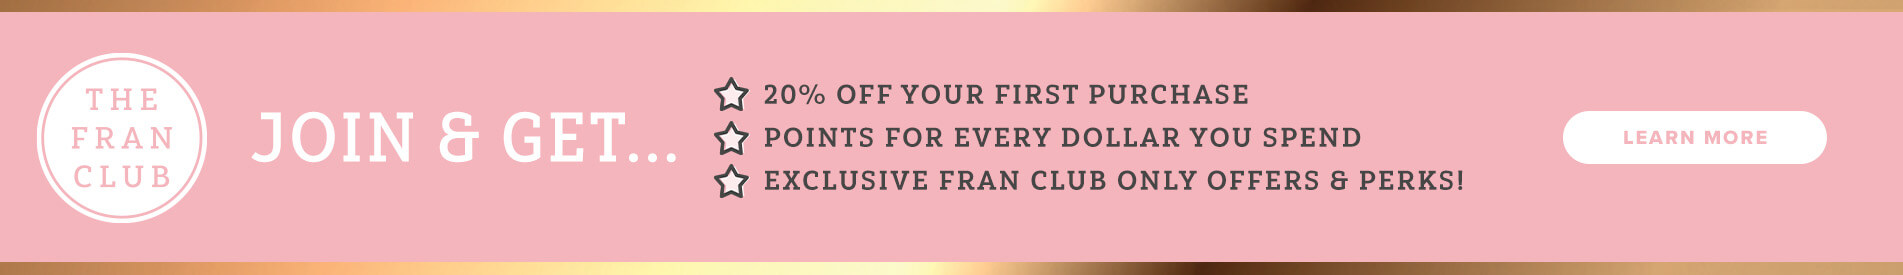 The Fran Club. Join & Get 20% Off Your First Purchase. Points For Every Dollar You Spend. Exclusive Fran Club Only Offers & Perks. Click Here To Learn More